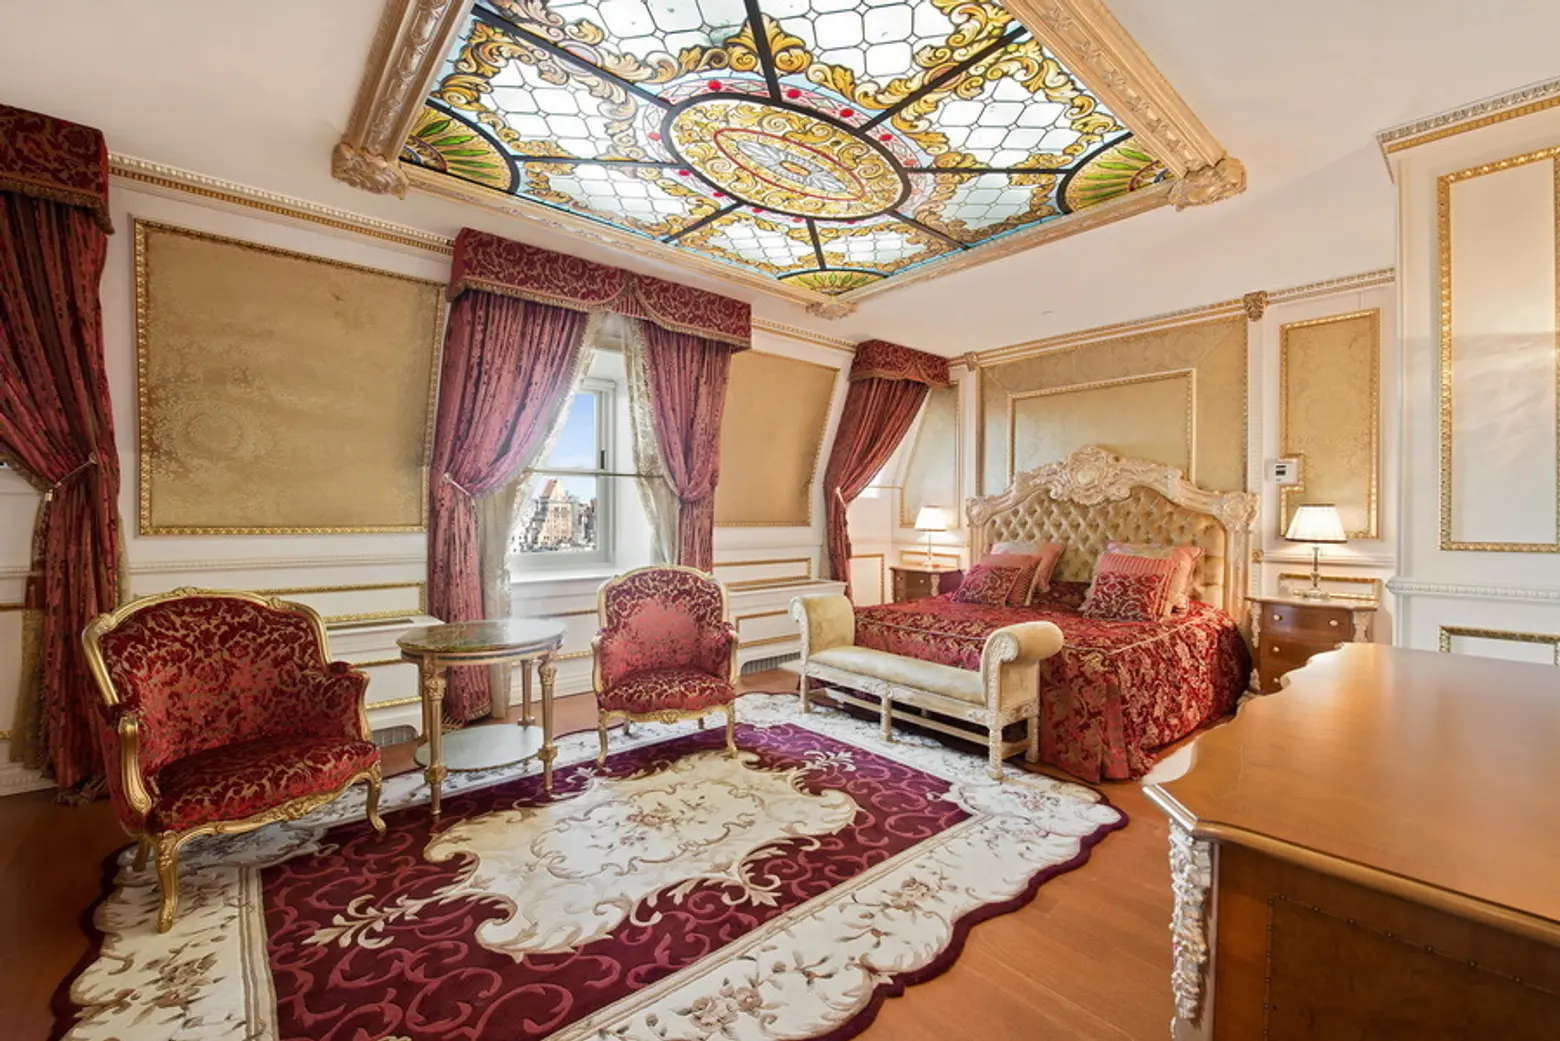 Rent the Ultra-Opulent Plaza Pad of Kazakhstan President’s Nephew for $55K a Month